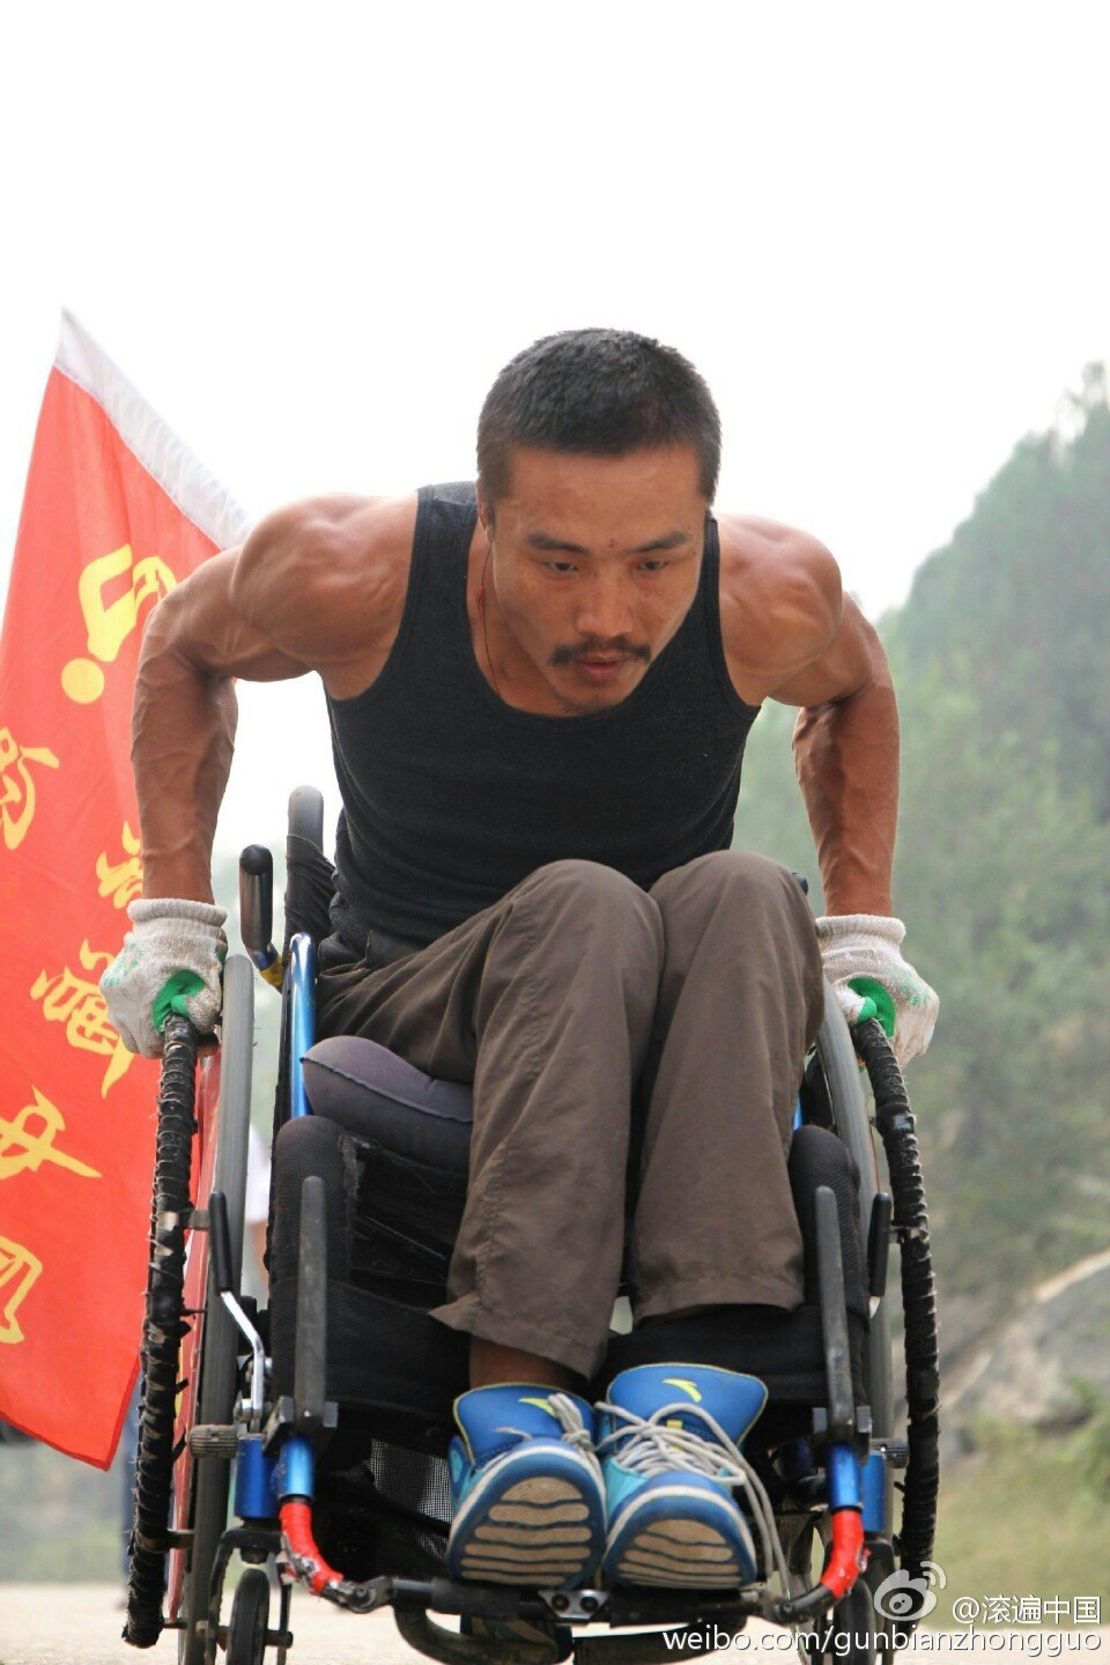 Quan has wheeled himself from Beijing to Fuzhou and has the muscles to prove it. 